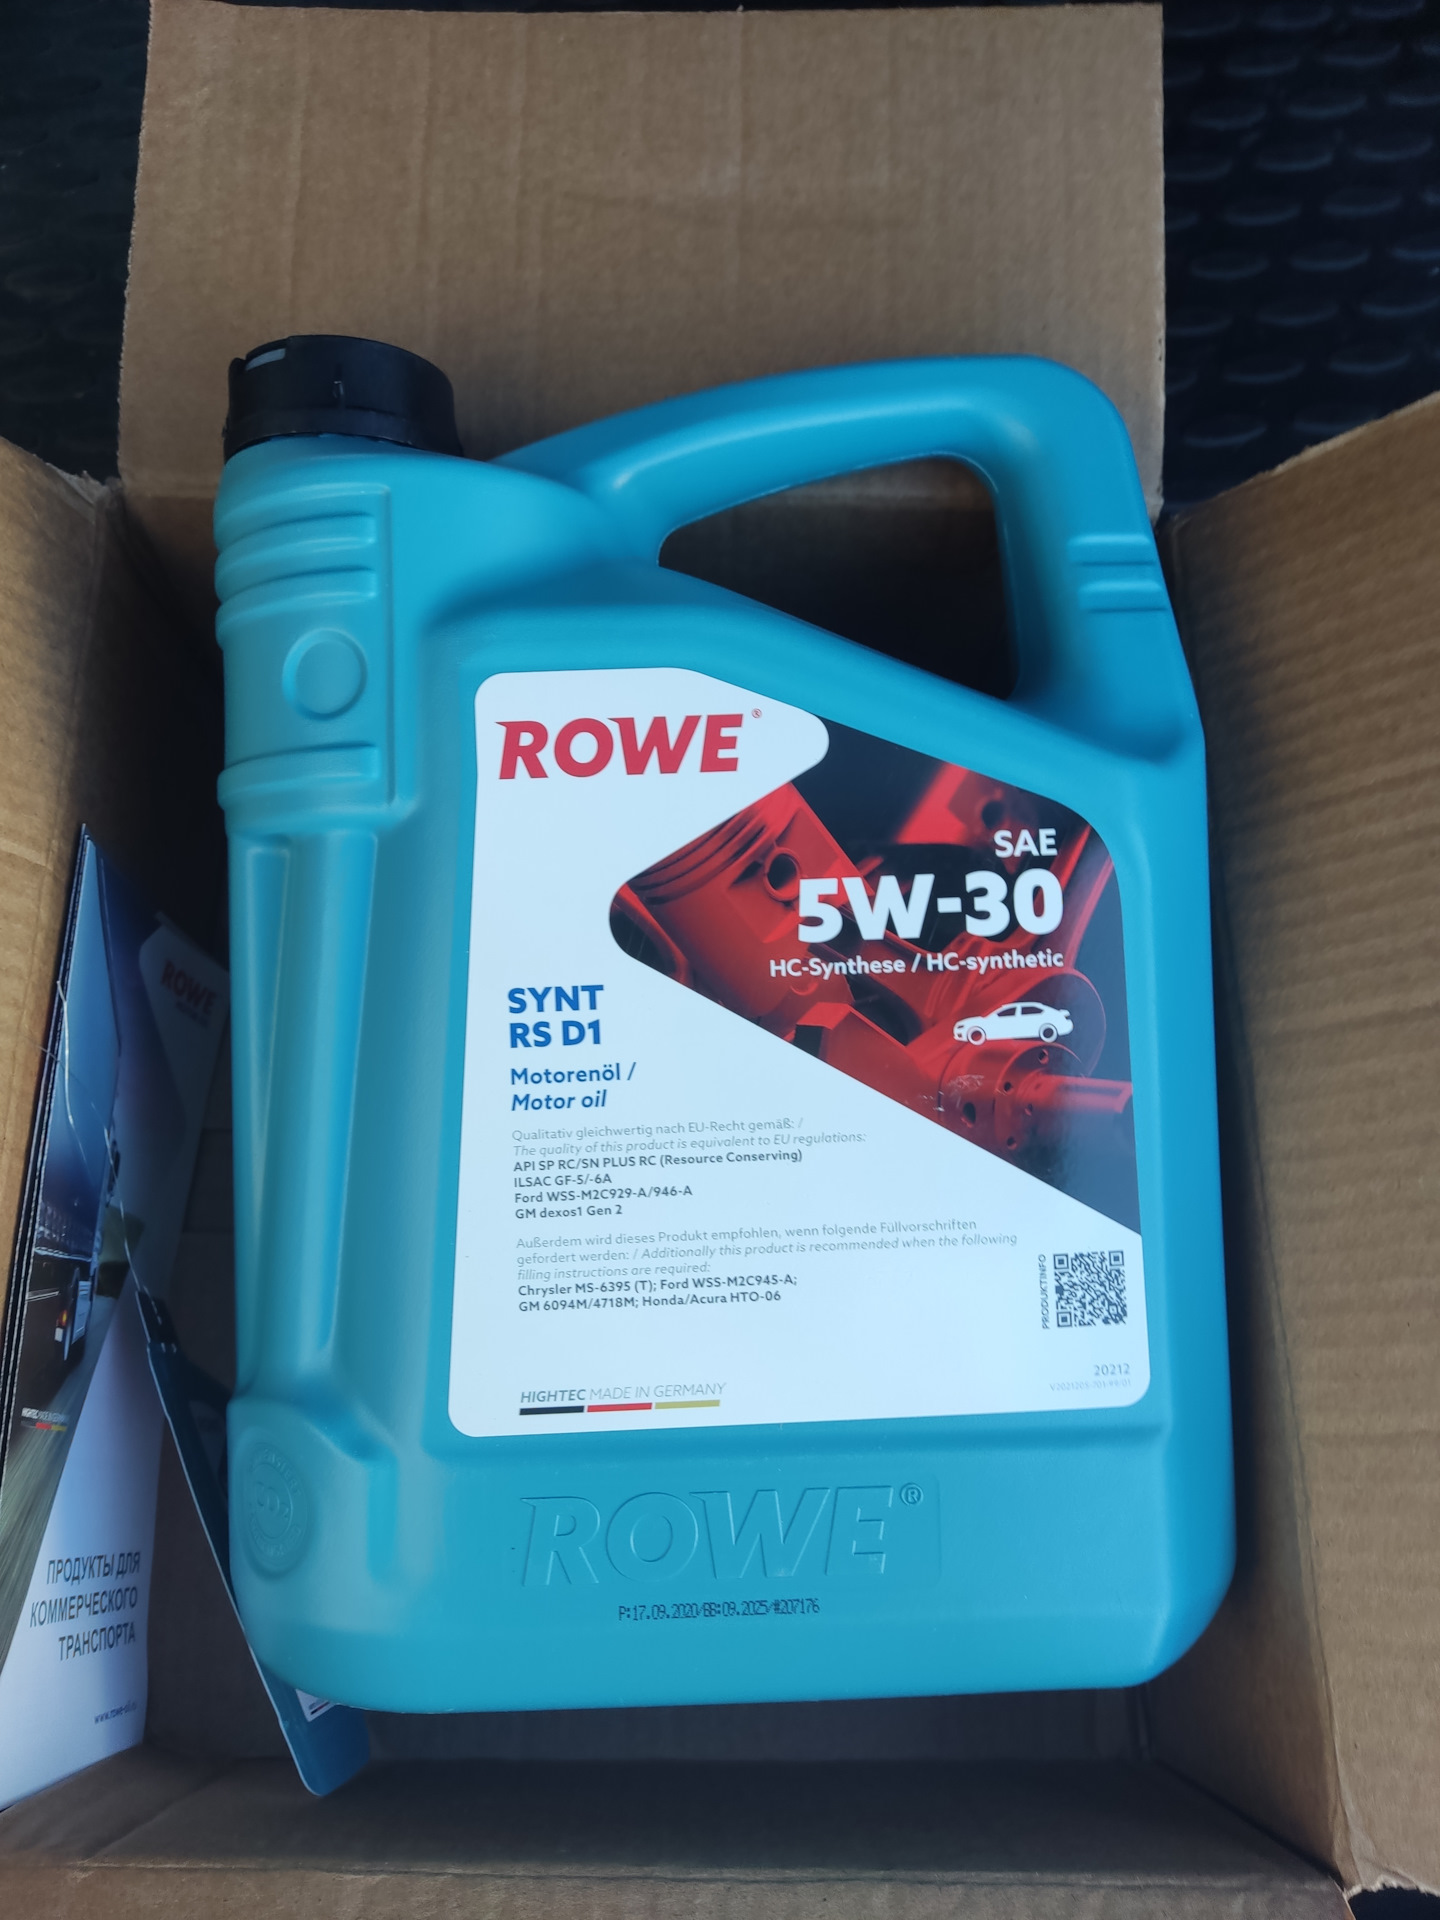 Rove масло. Масло Rowe 5w30 Asia. Rowe масло 5/30. Rowe 5w30 Hyundai. Масло Rowe 5w30 Тойота.